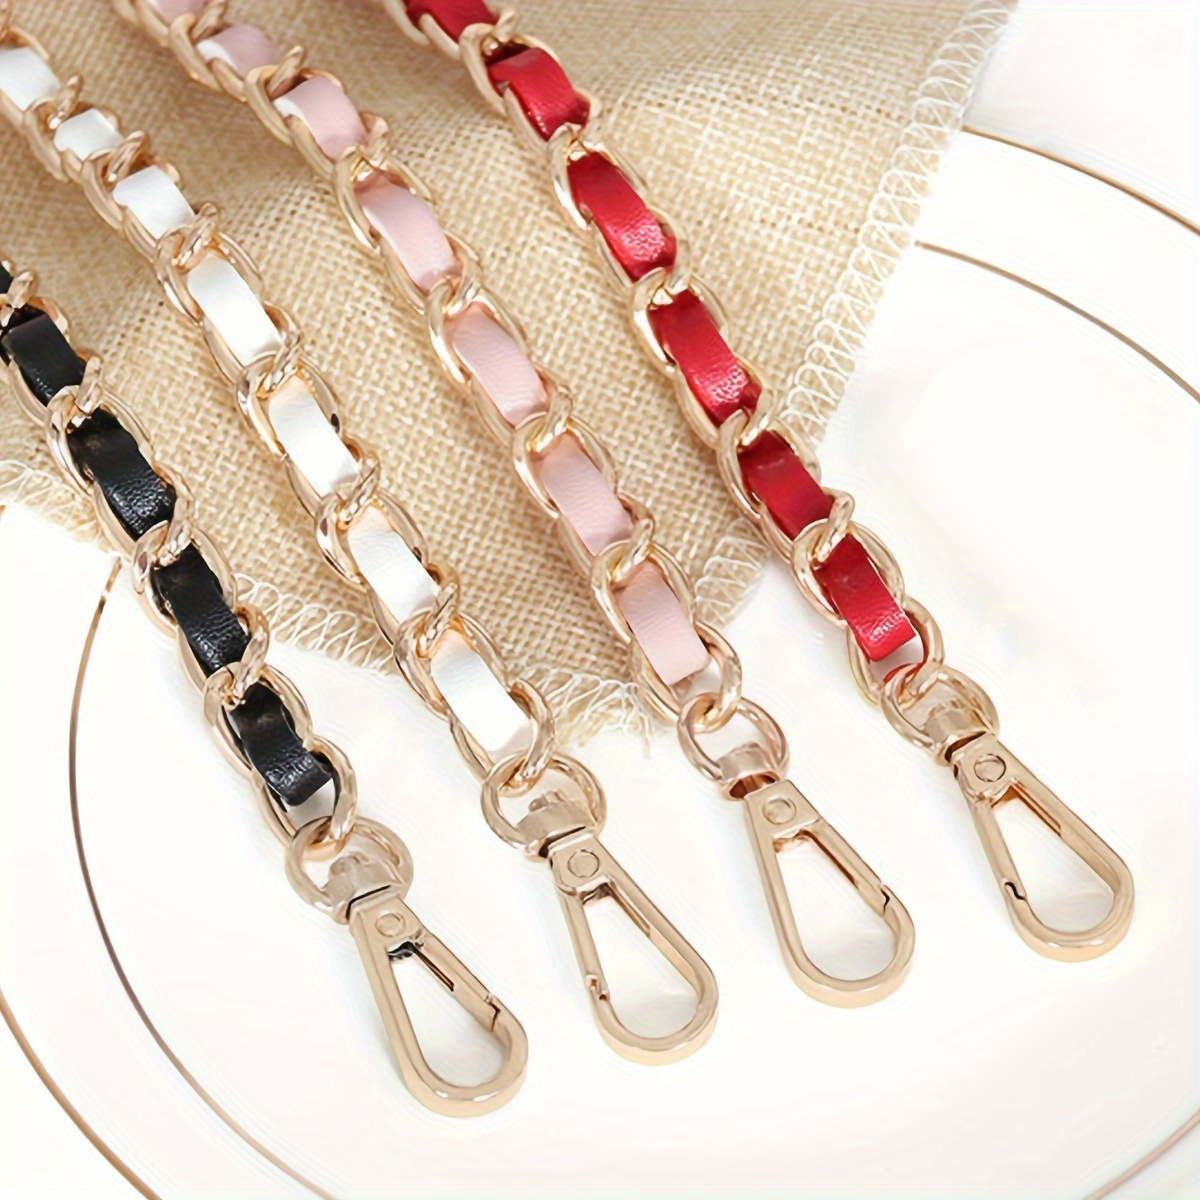 Purse Chain Strap Shoulder Silvery Chain With Alloy Swivel Clasps